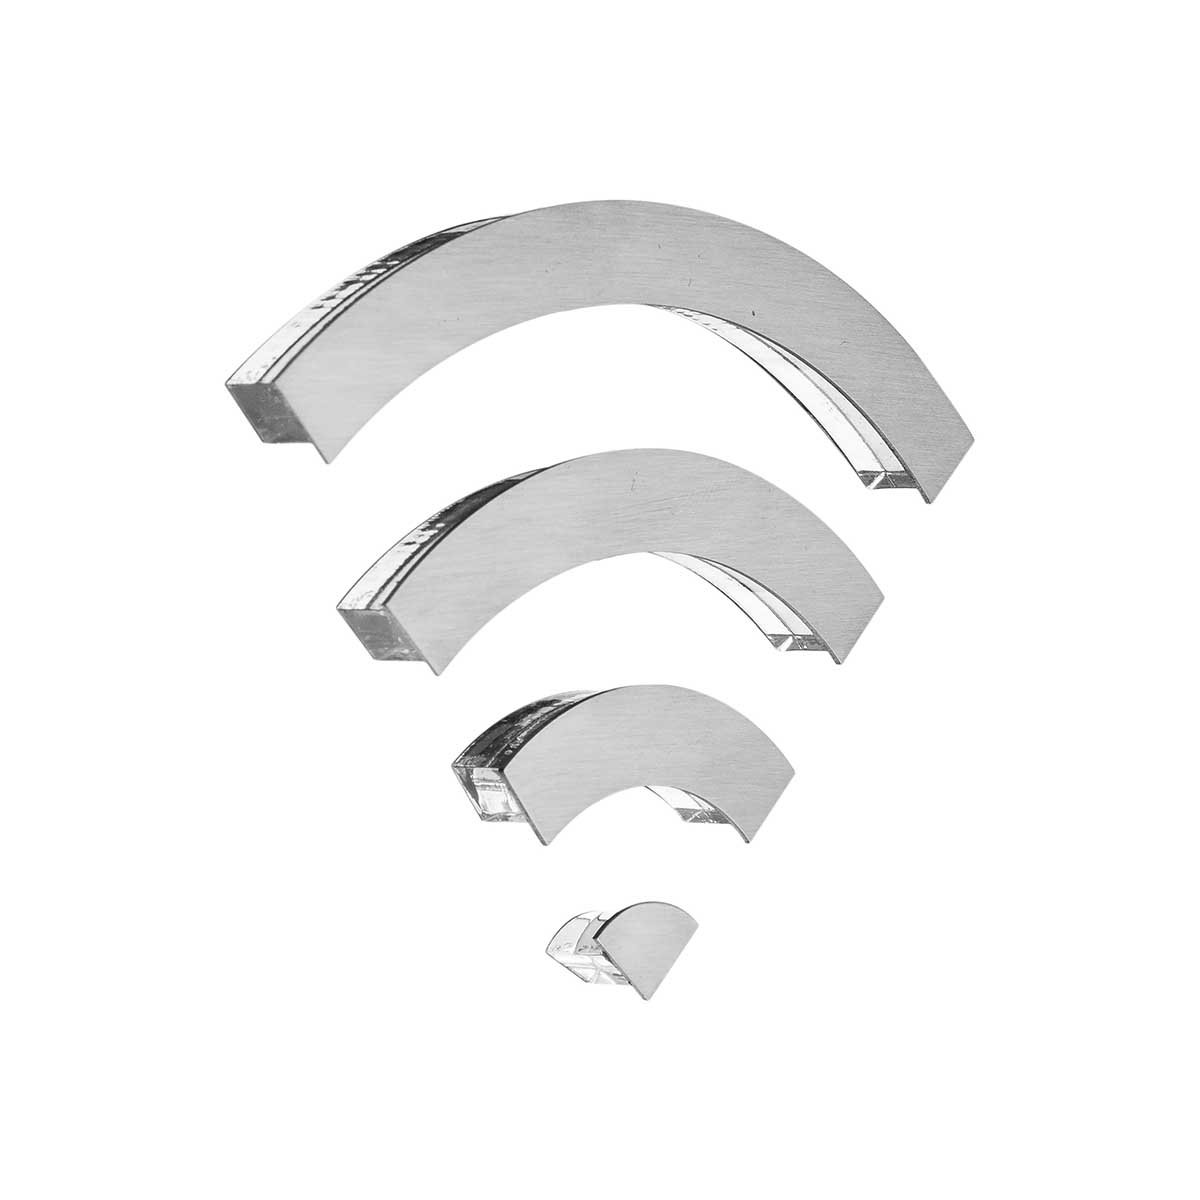 Steel Wi-Fi Symbol for Wall Information signs clear acrylic glass and stainless steel Bsign